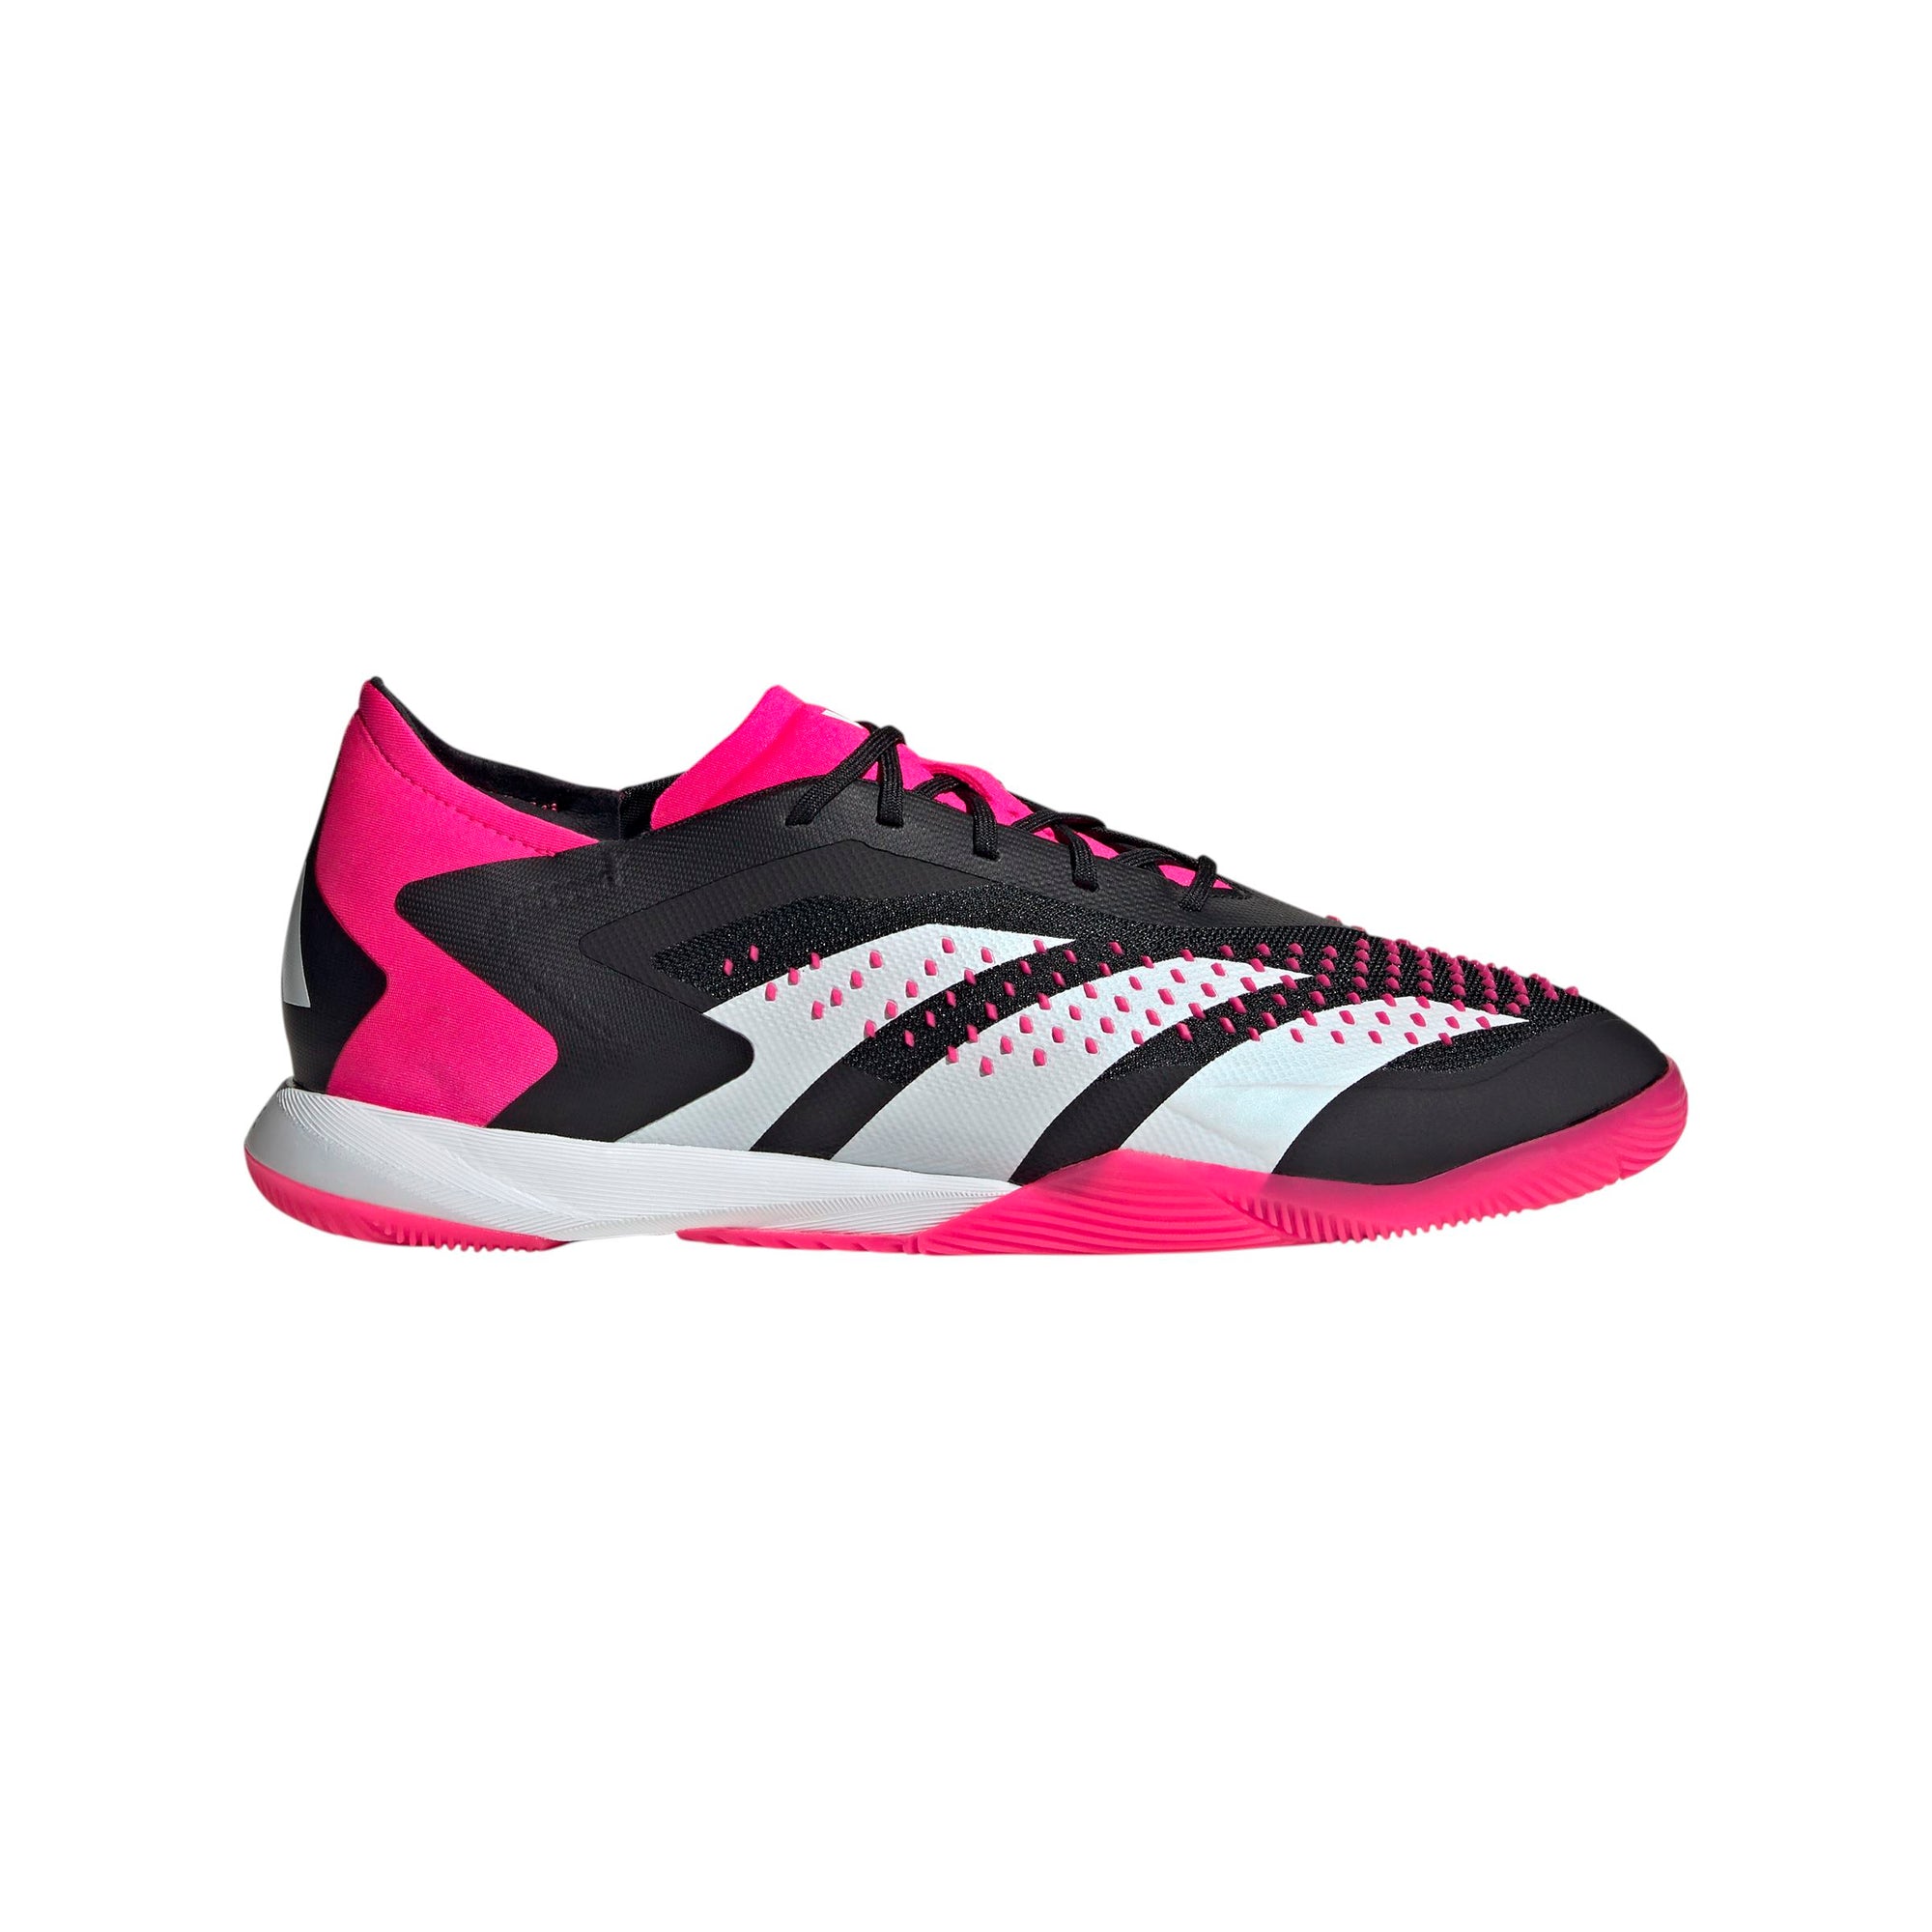 adidas Unisex Predator Accuracy.1 Indoor Shoes | GW4556 Cleats Adidas 7 Core Black / FTWR White / Team Shock Pink 2 